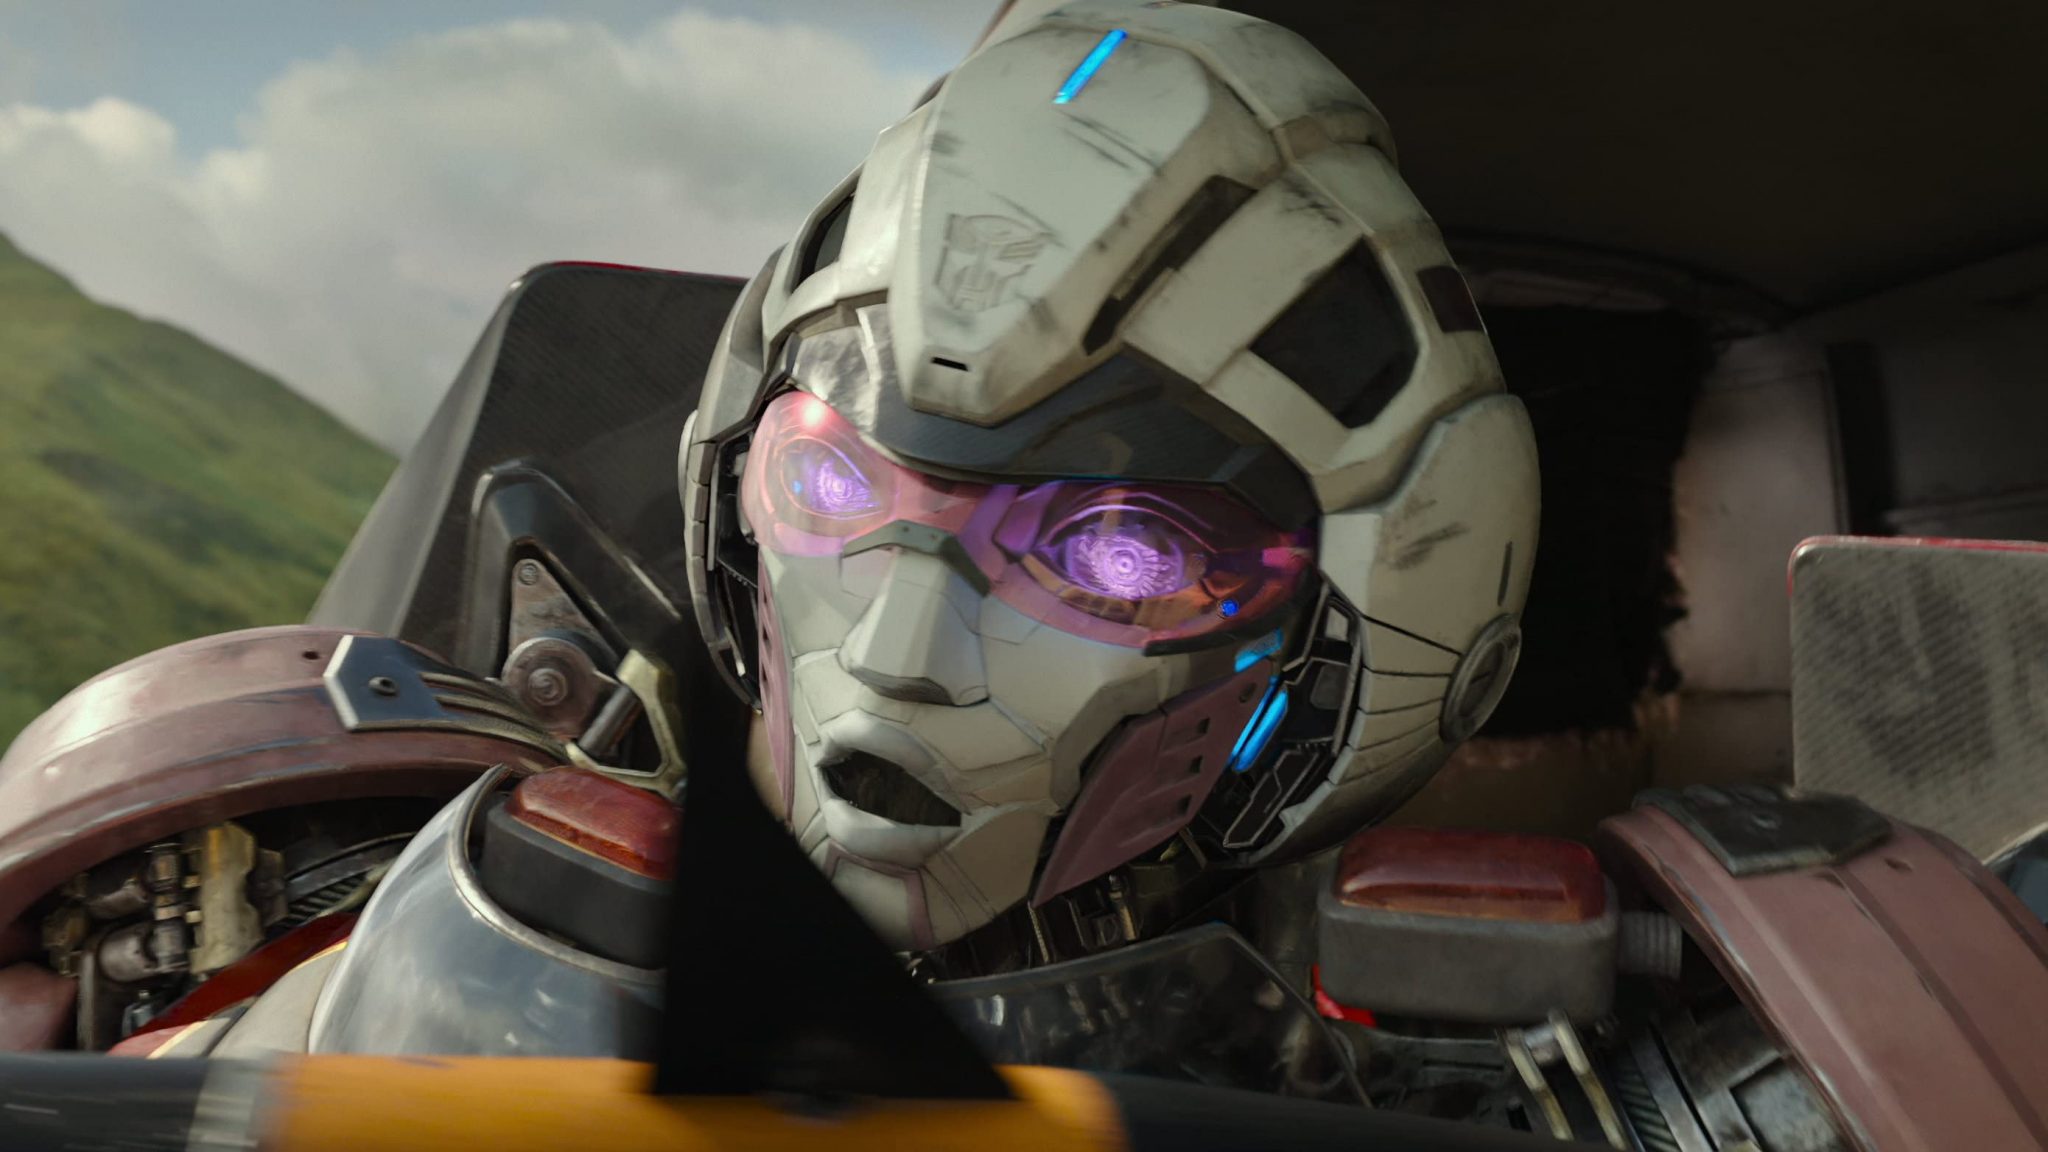 Credit: Paramount Pictures (Transformers: Rise of the Beasts)